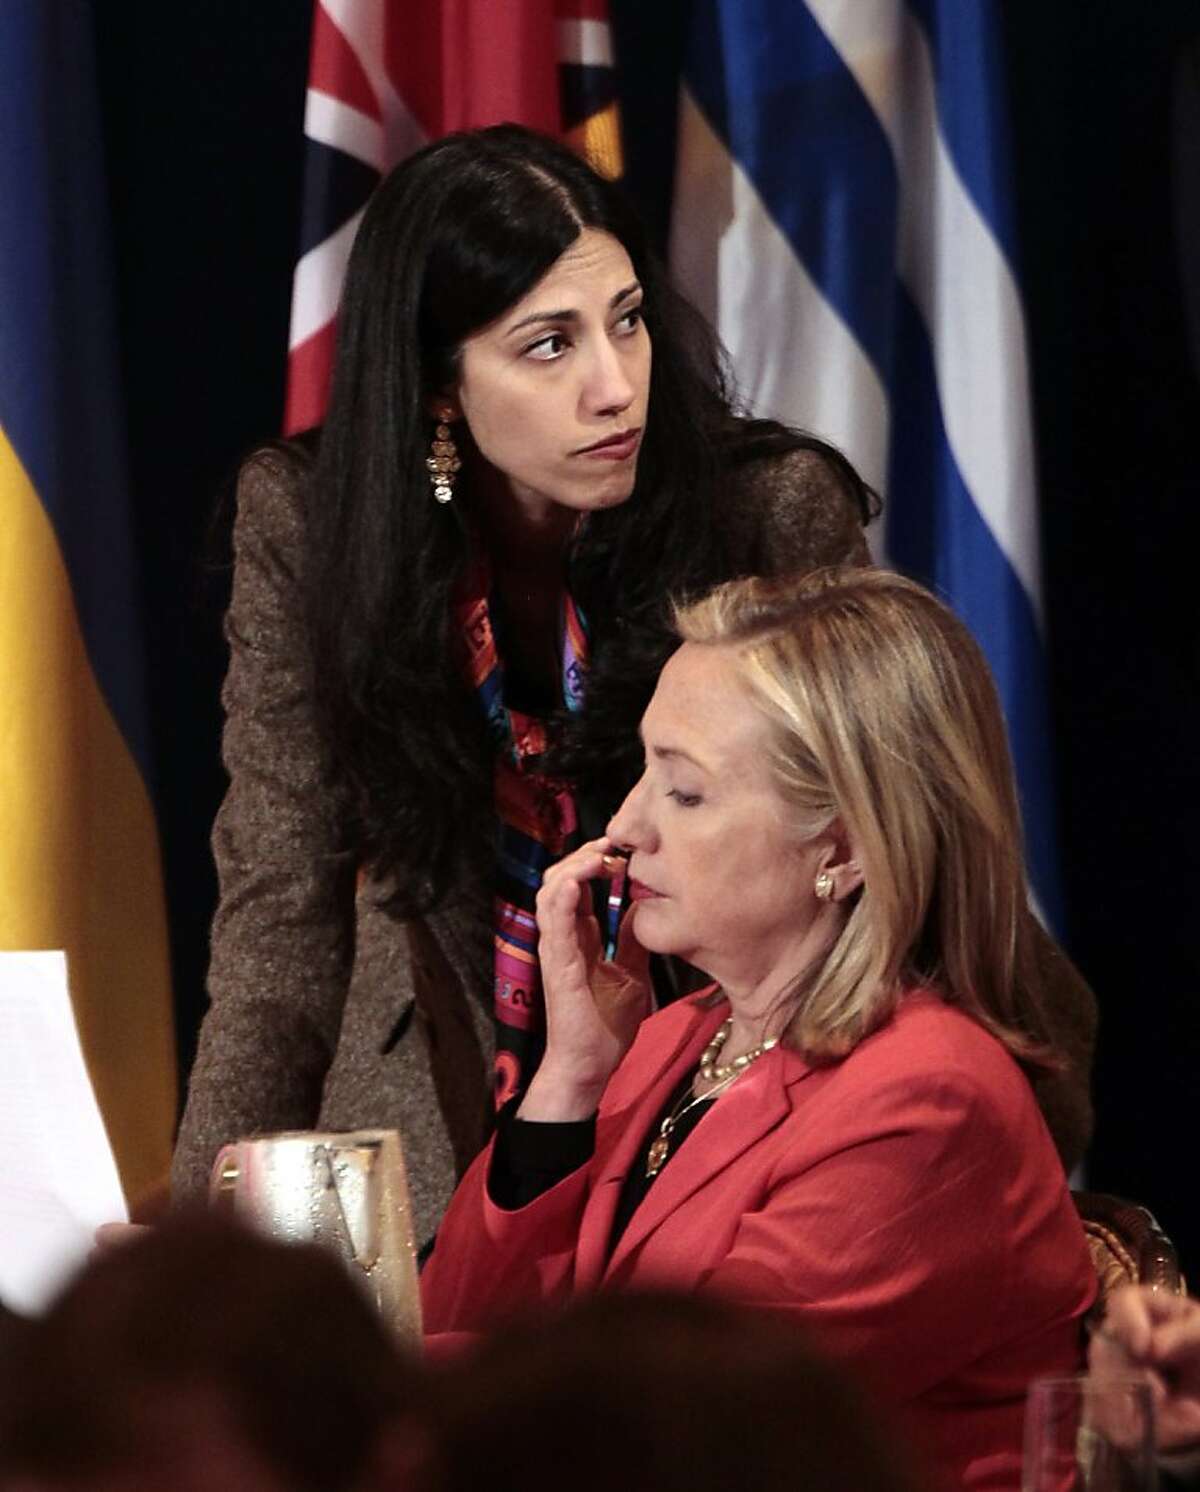 FILE - In this Sept. 20, 2011 file photo, Huma Abedin, top, deputy chief of staff and aide to Secretary of State Hillary Rodham Clinton, right, during a meeting with leaders for the Open Government Partnership in New York. Republican Sen. John McCain is defending a longtime aide to Secretary of State Hillary Rodham Clinton against unsubstantiated allegations that her family has ties to Egypt's Muslim Brotherhood. (AP Photo/Pablo Martinez Monsivais)